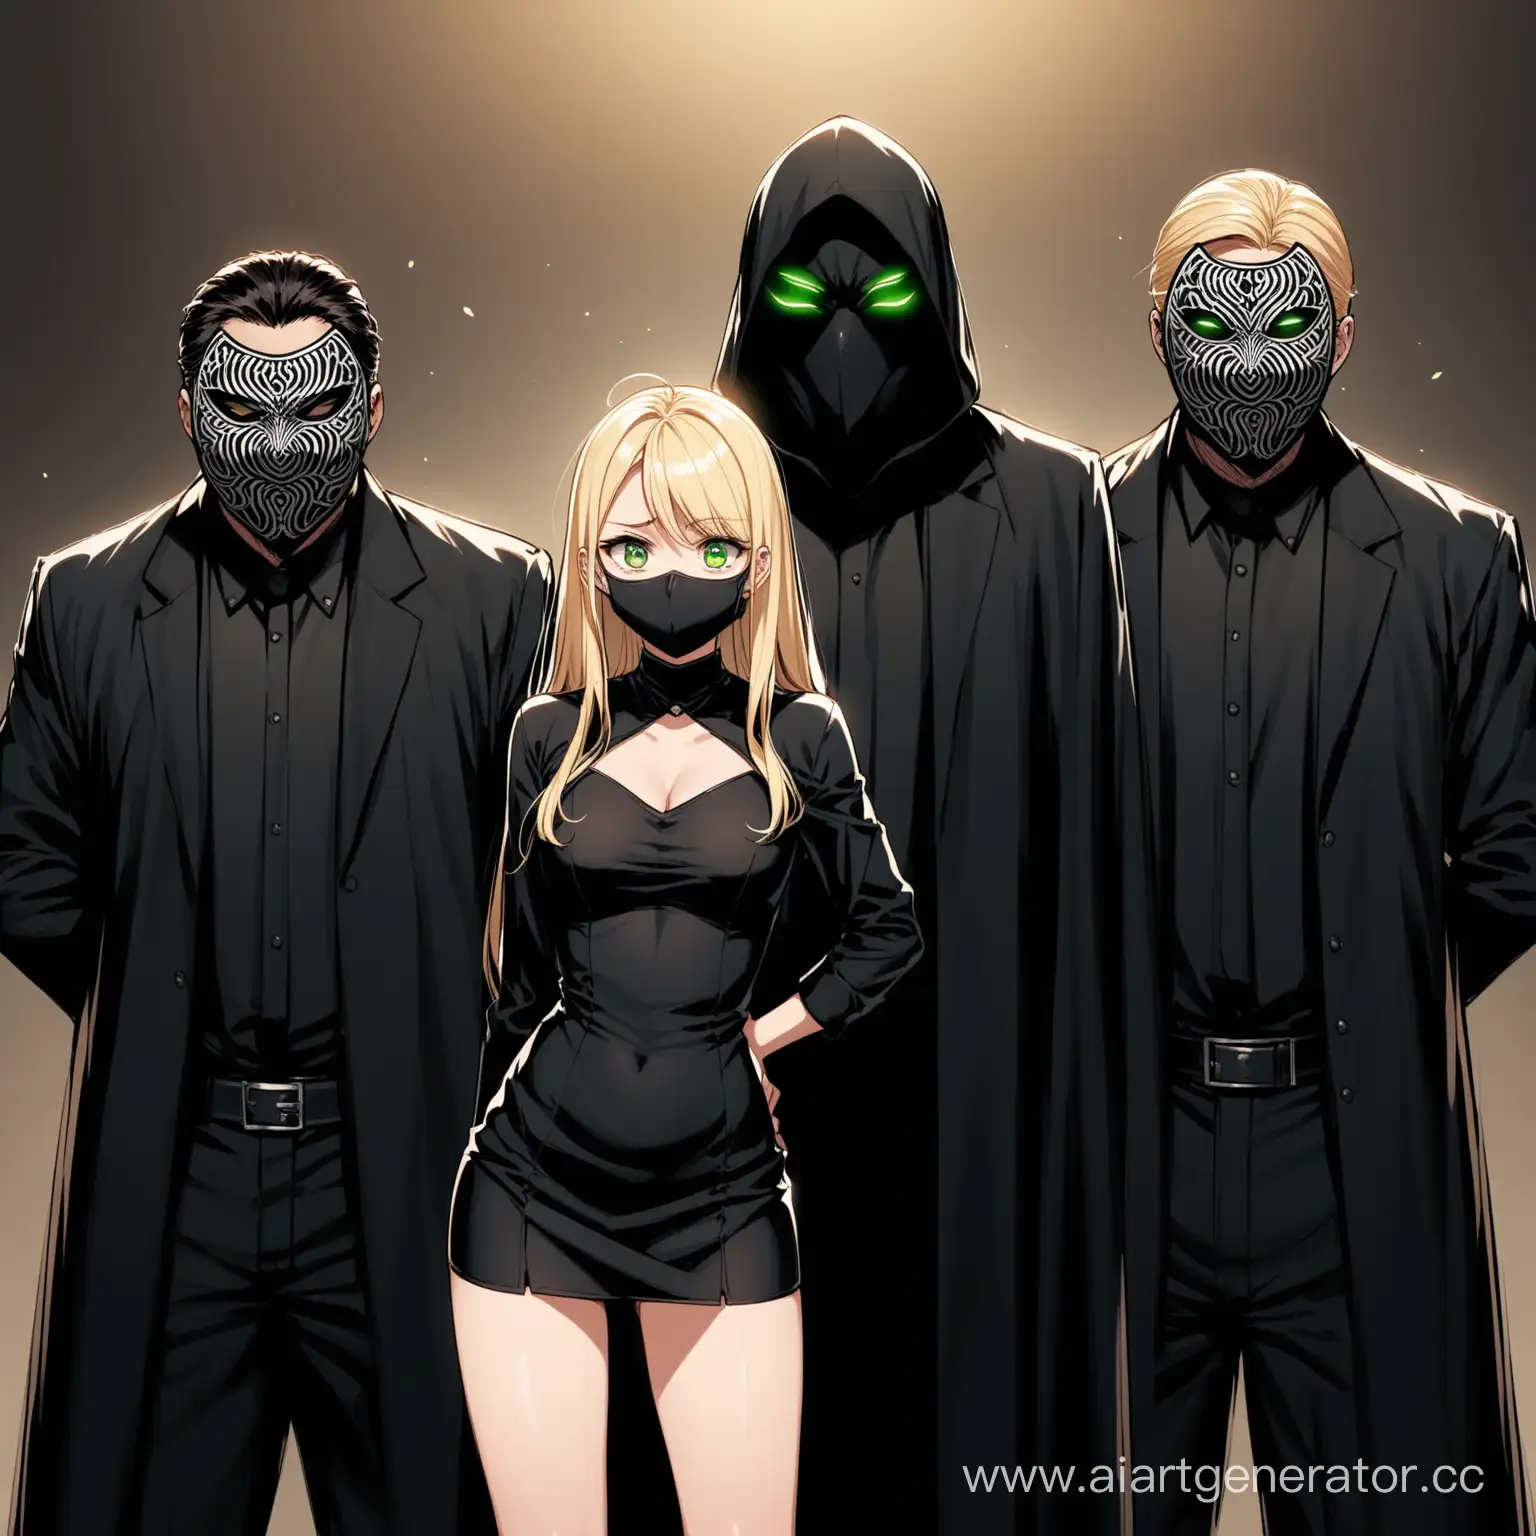 Blond-Girl-in-Distress-Surrounded-by-Masked-Men